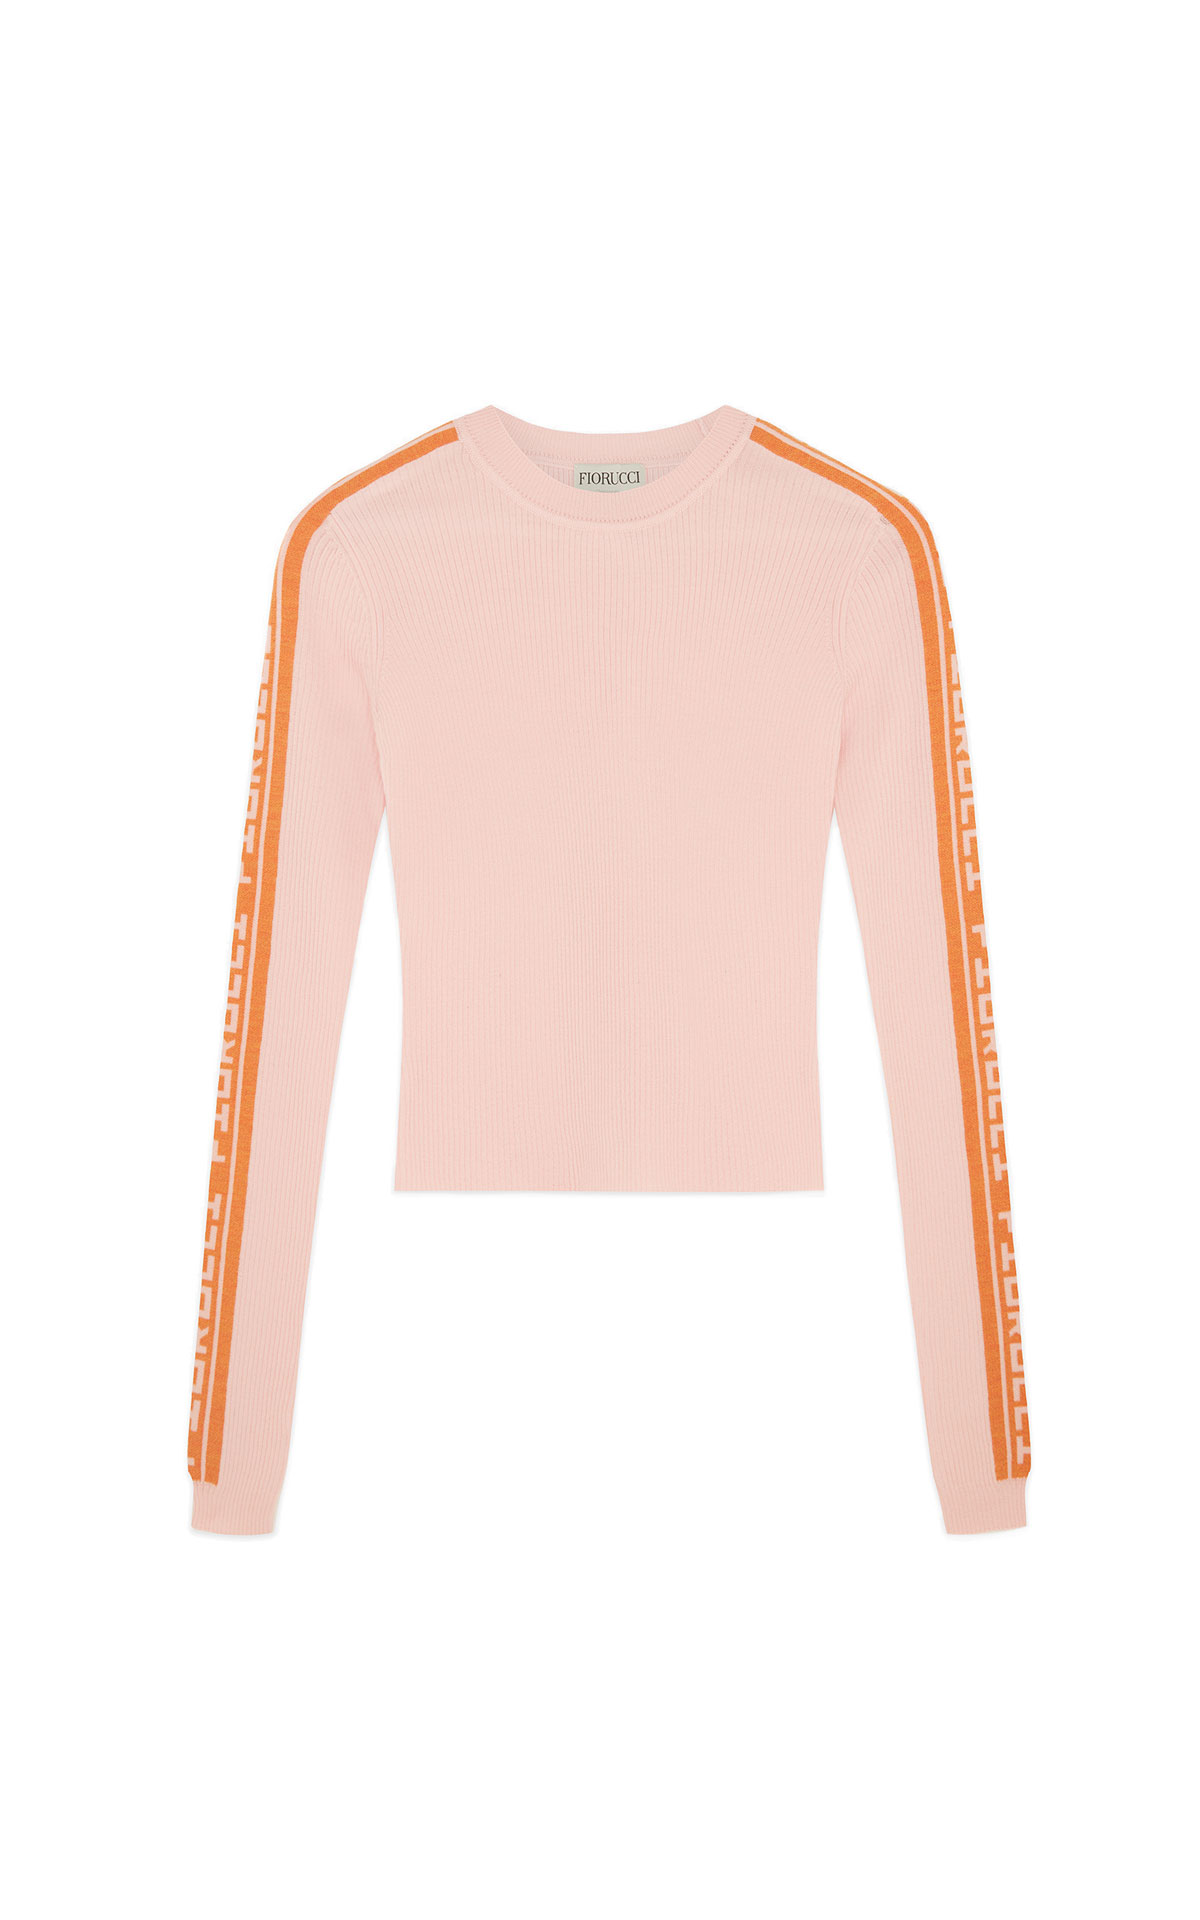 Fiorucci Rib logo sweater pink from Bicester Village